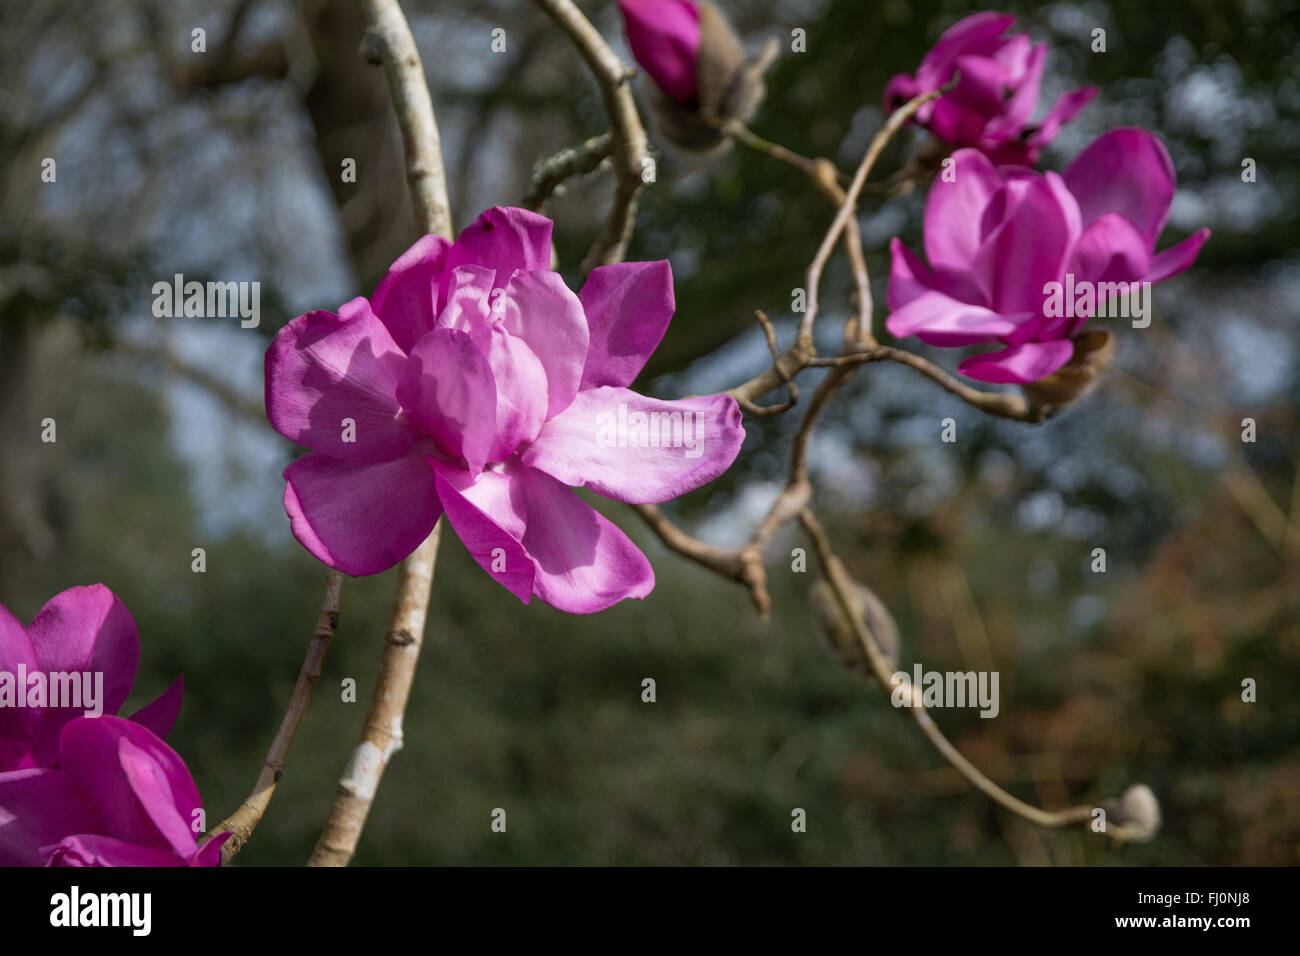 Deep pink magnolia flowers against an out of focus background Stock Photo